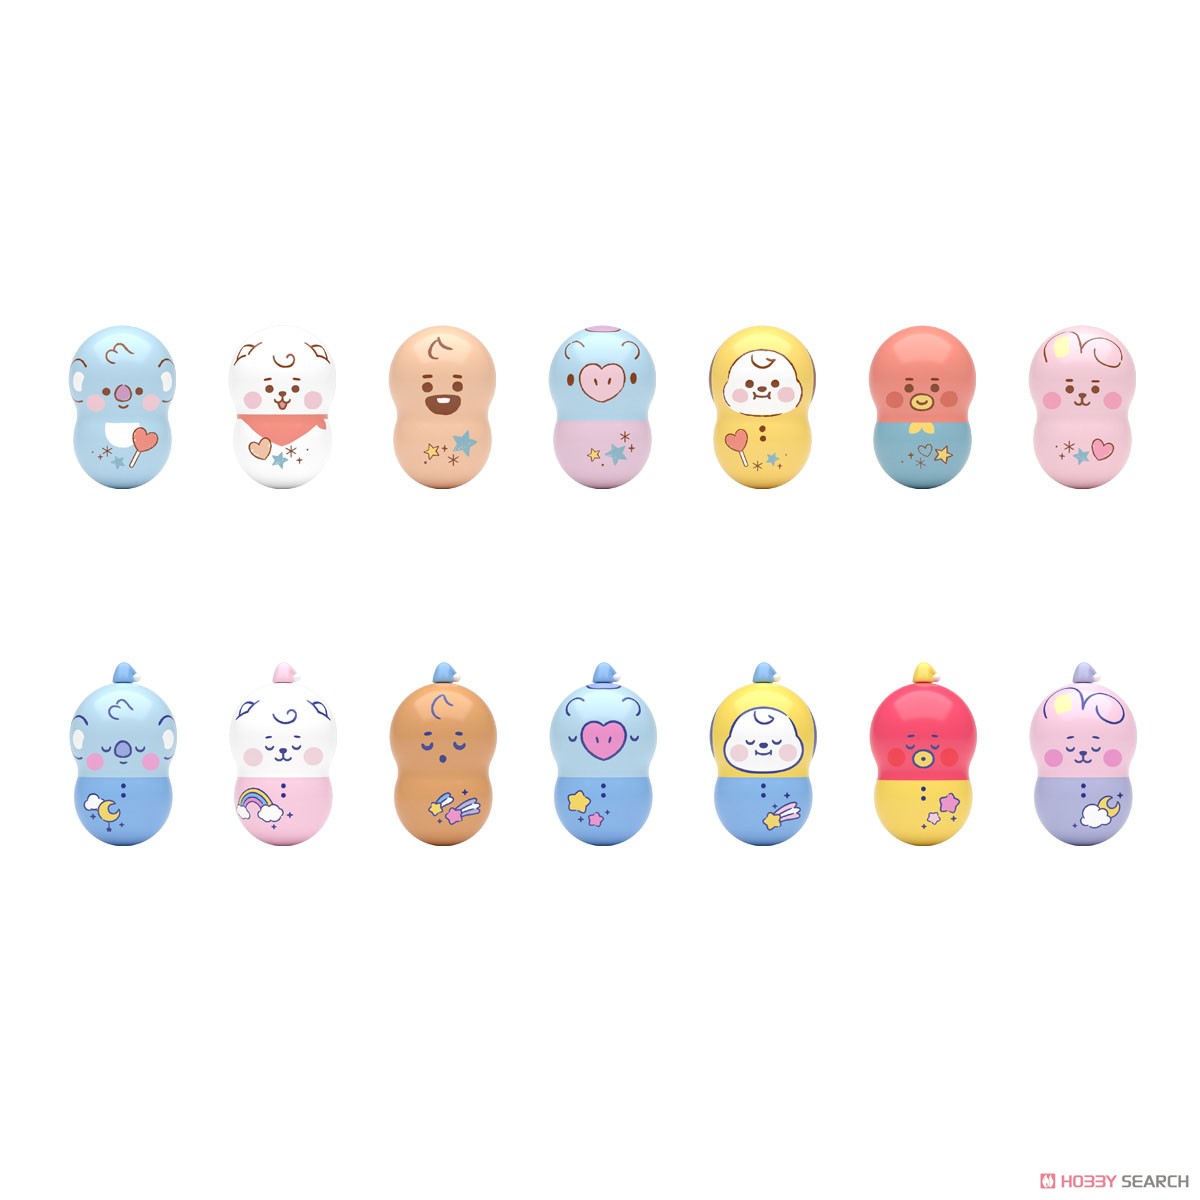 Coo`nuts BT21 BABY (14個セット) (食玩) 商品画像1